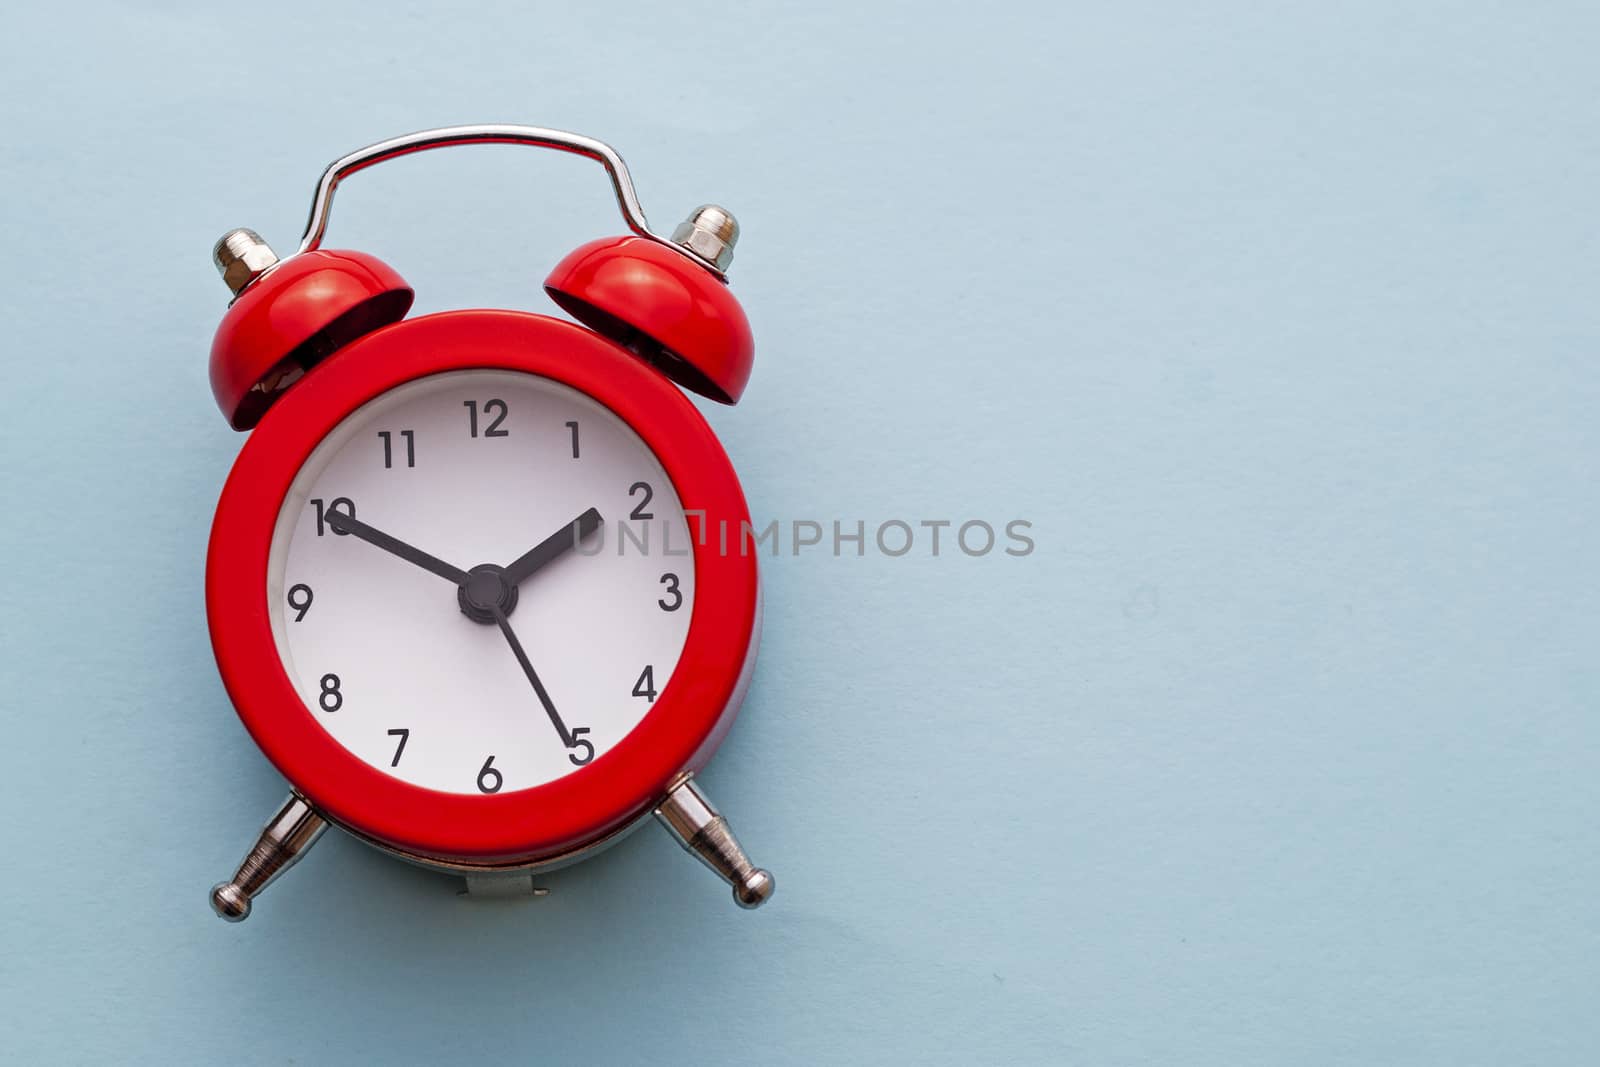 Colorful red traditional alarm clock with bells on a bright blue background with copy space placed to the side